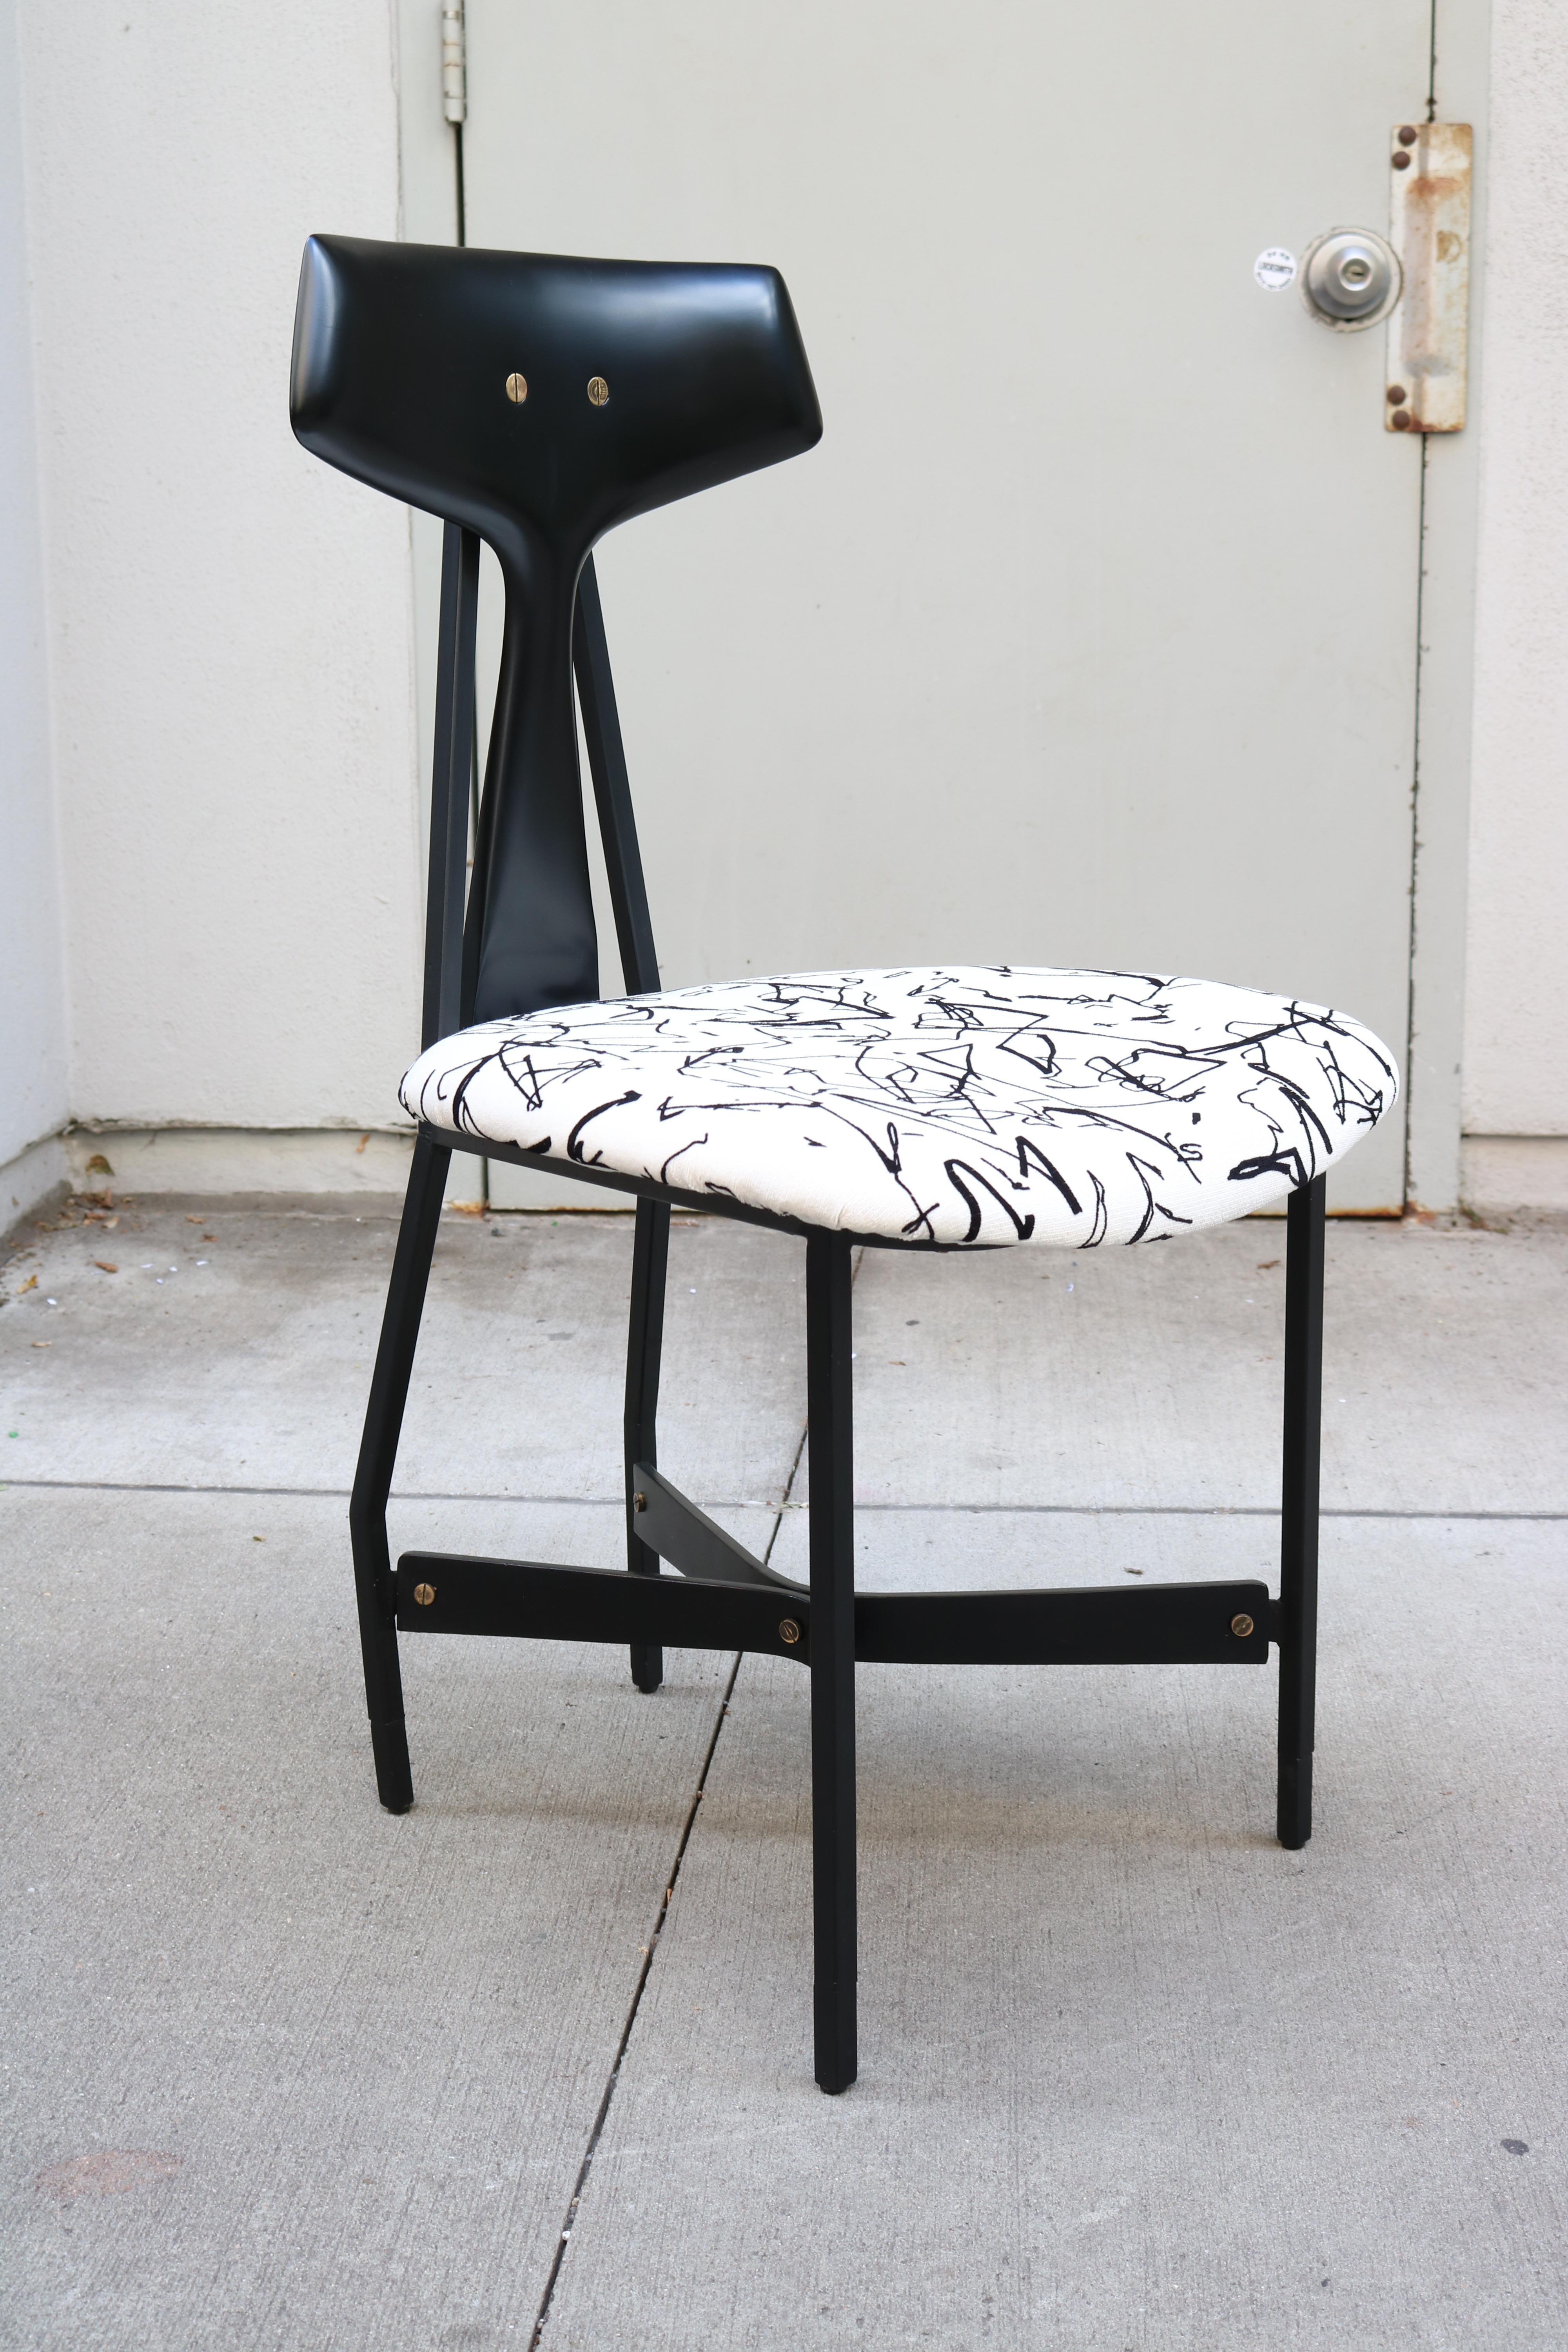 A set of four modernist side chairs in ebonized wood and black metal. 